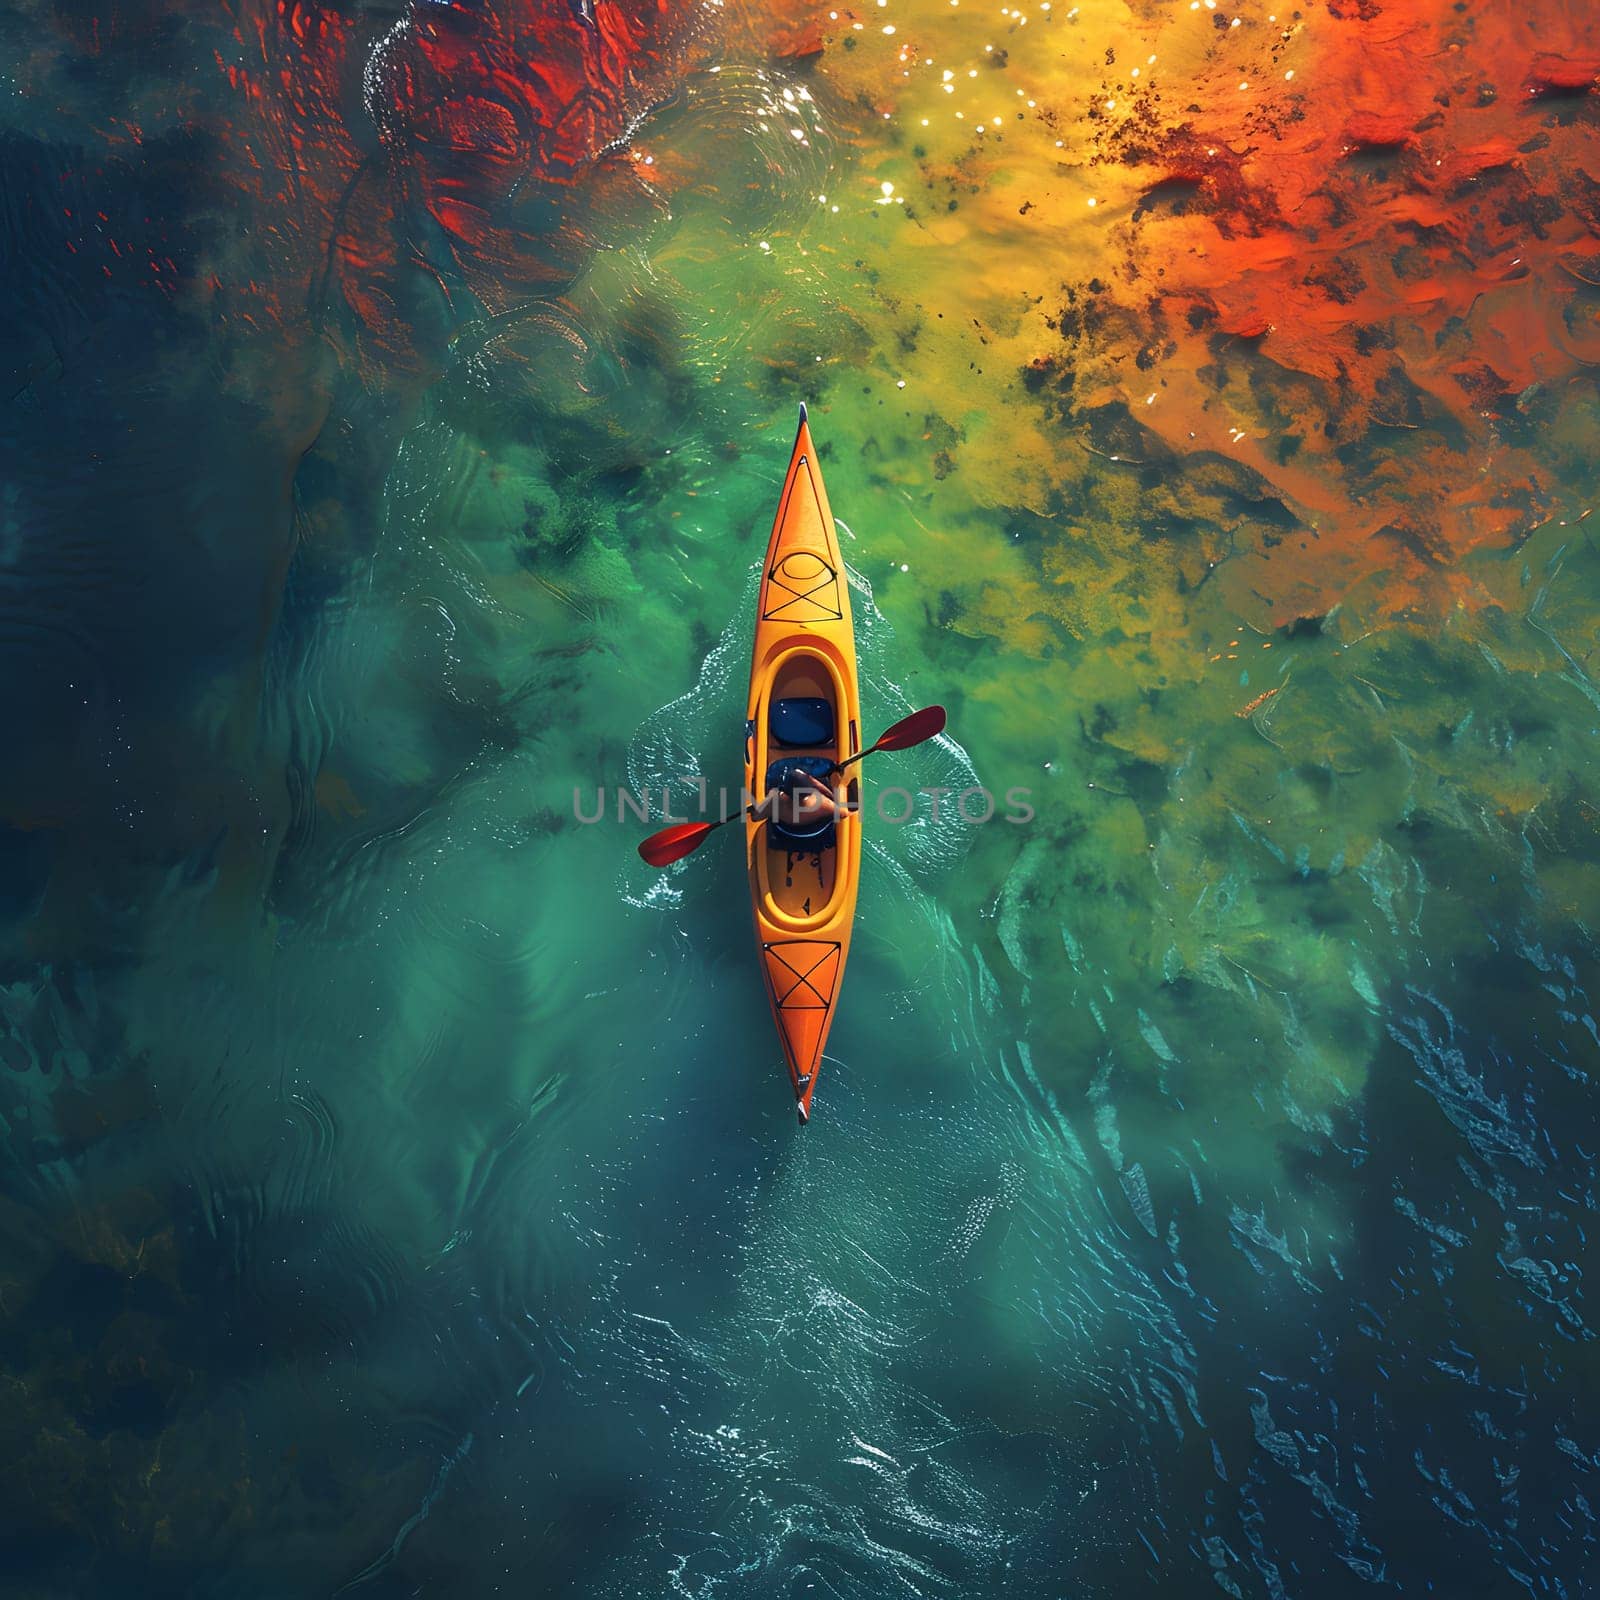 Observing a person in a kayak from an aerial view as they navigate the waters, surrounded by underwater marine organisms like fish and koi